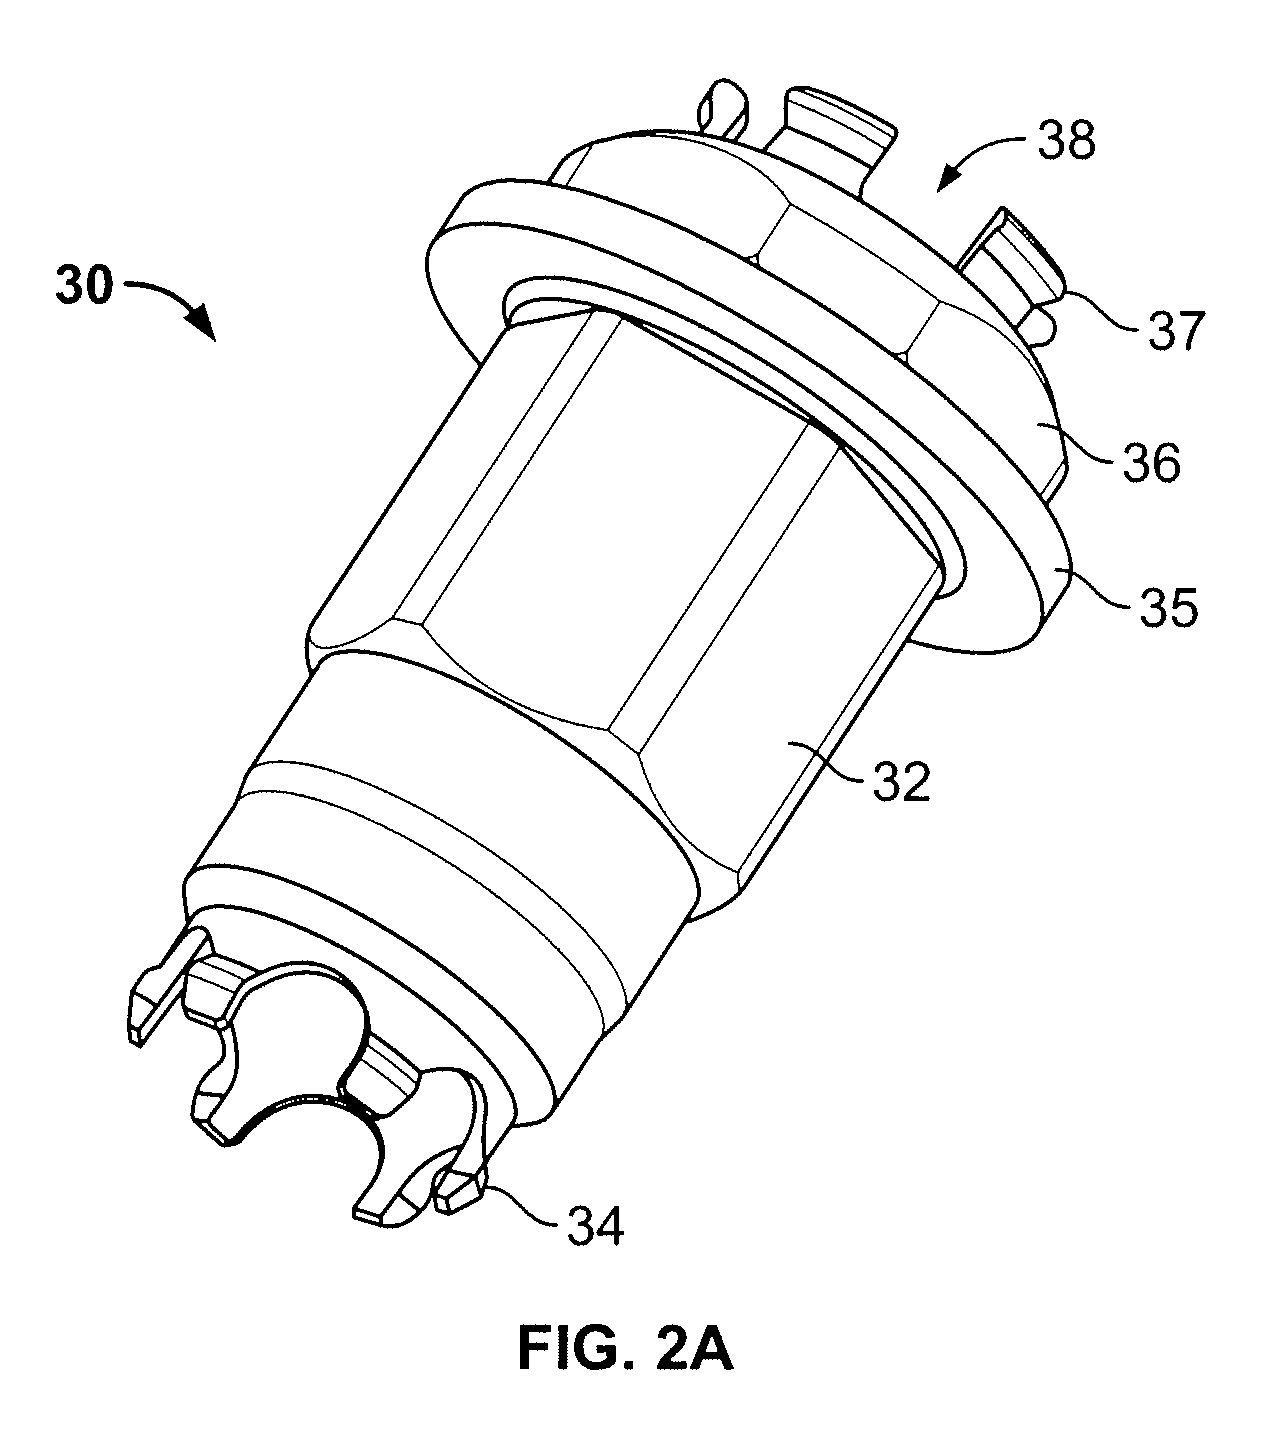 Two-piece dental abutment system